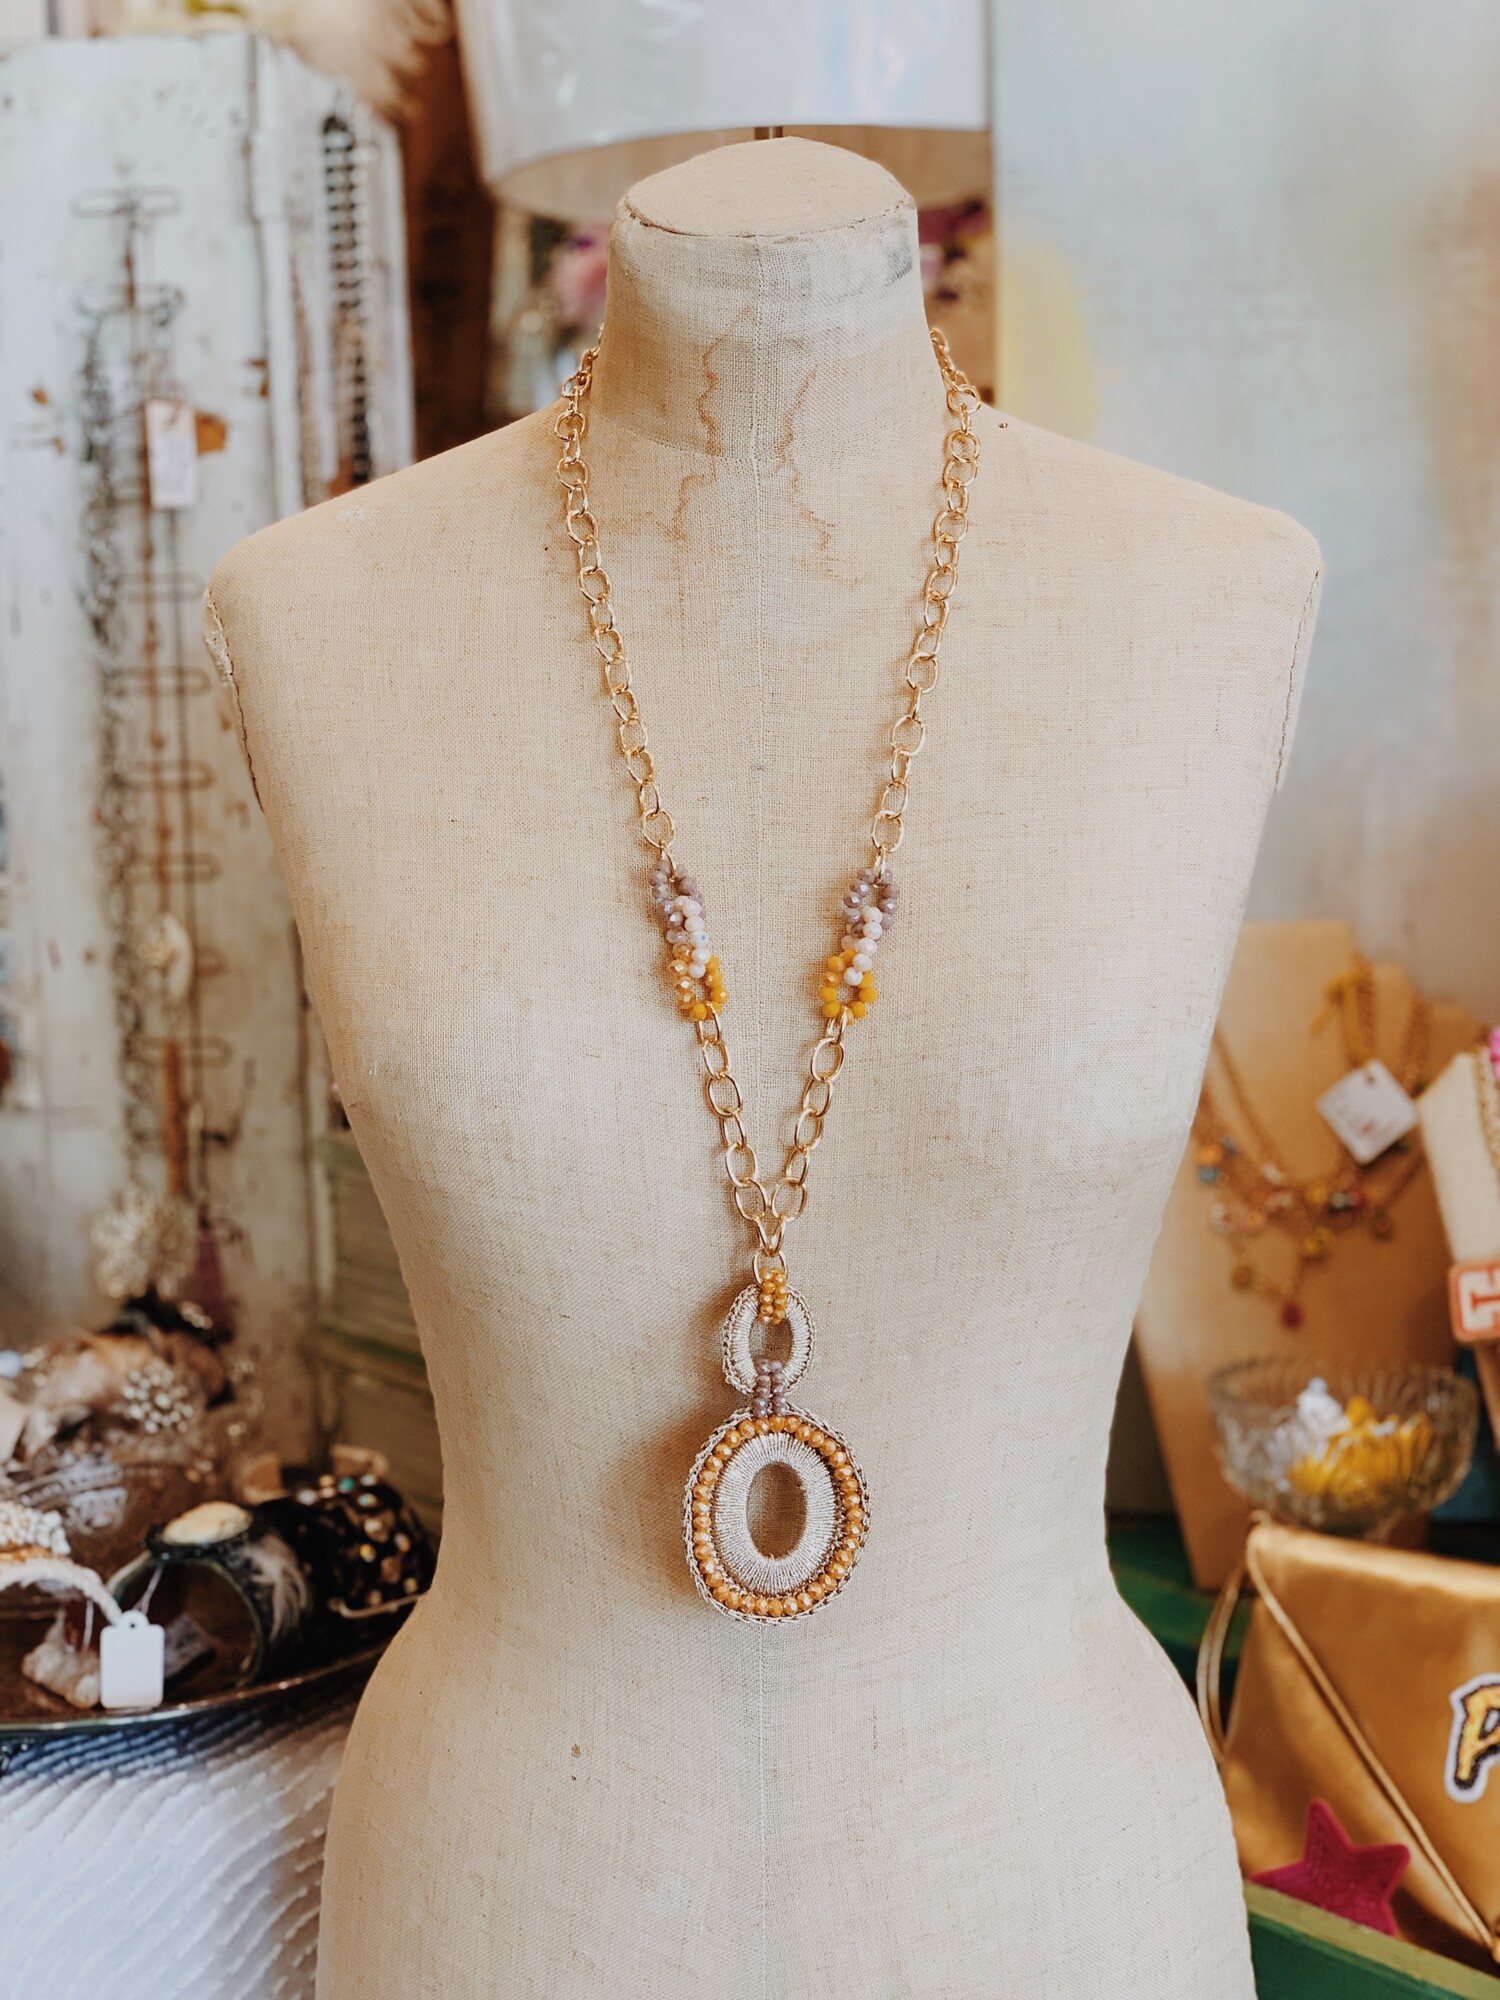 This long necklace is perfect on its own or with a shorter necklace paired for layering! Such fun colors paired with this gold chain!